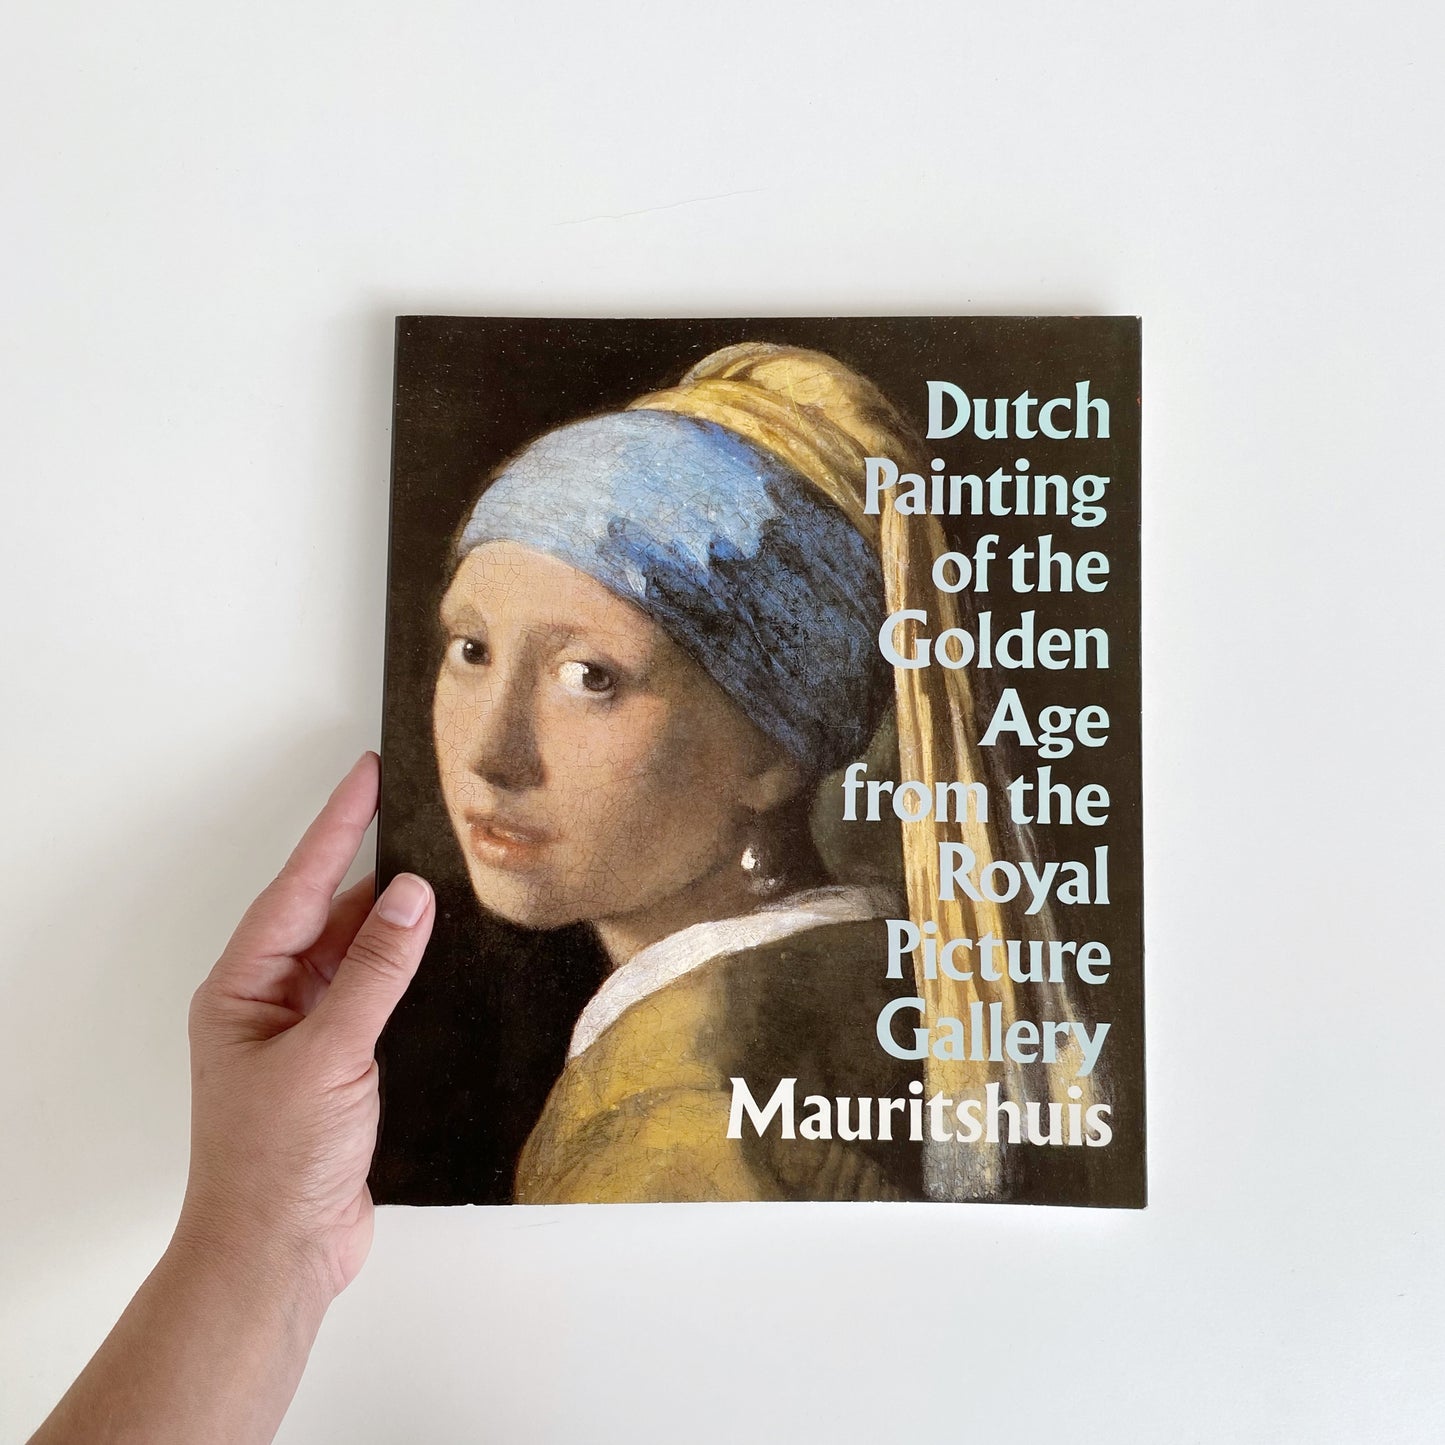 Book: Dutch Painting of the Golden Age